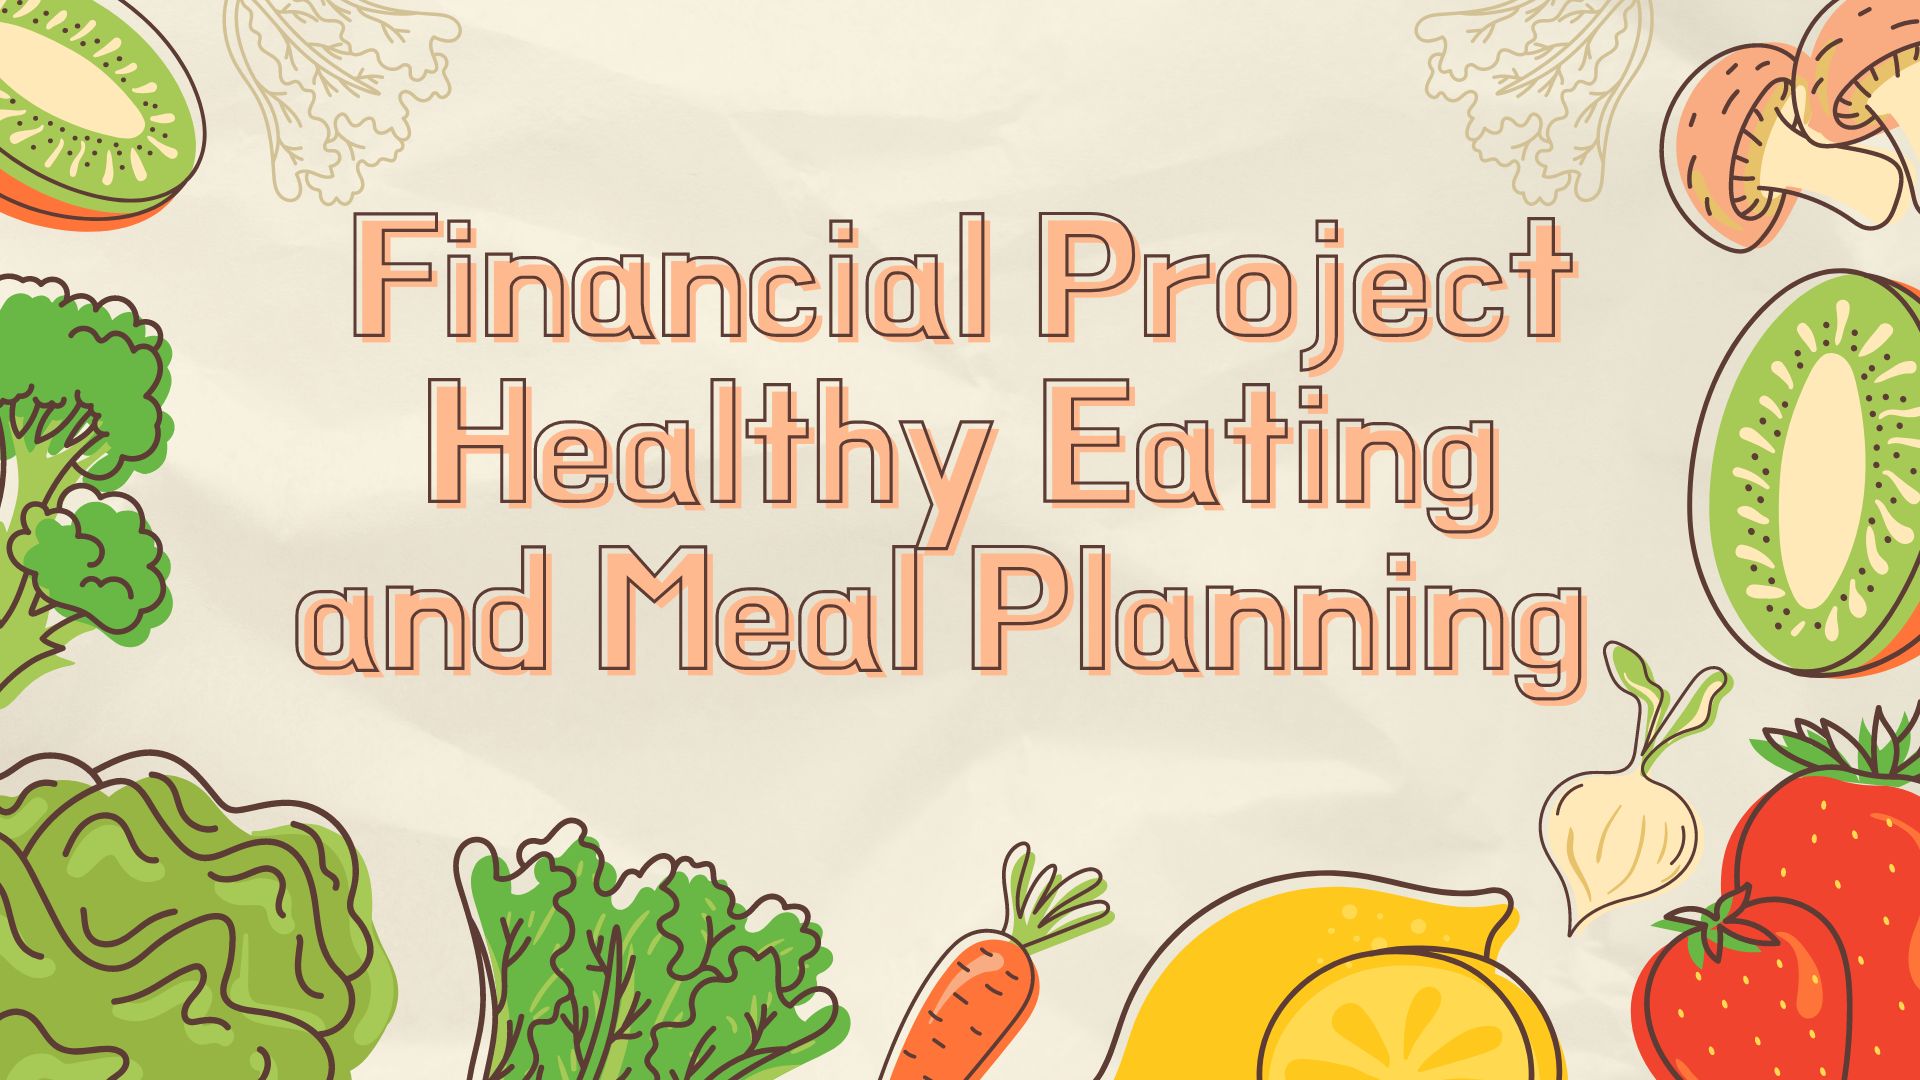 Graphic of title surrounded by colorful vegetables.